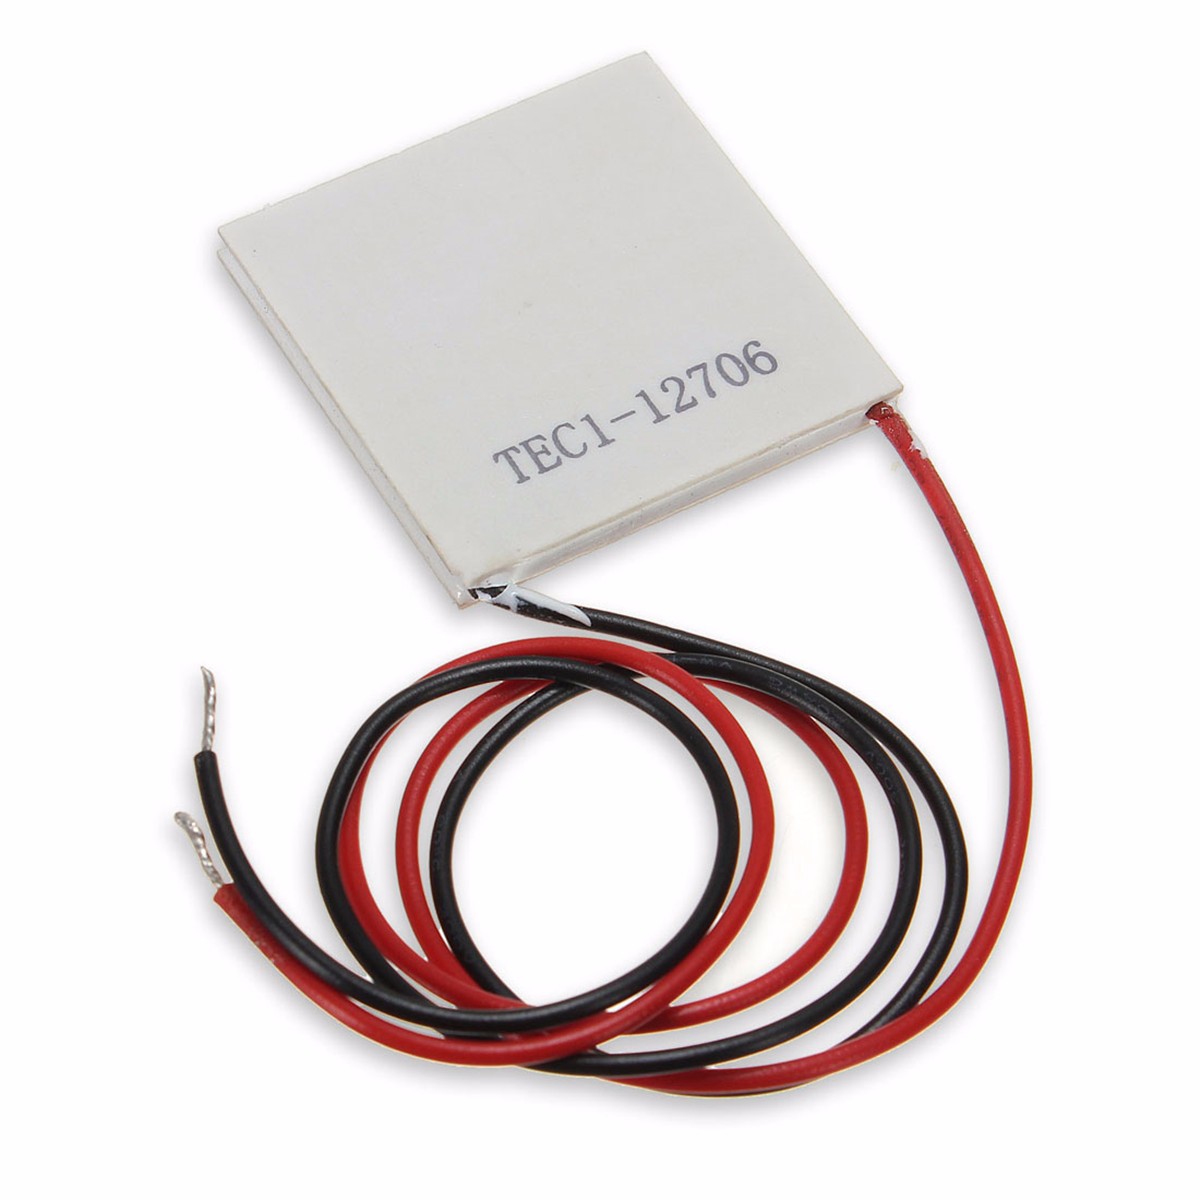 1 Pcs TEC1-12706 Thermoelectric Peltier Cooler 12v 6A 72W 40x40mm Semicon 